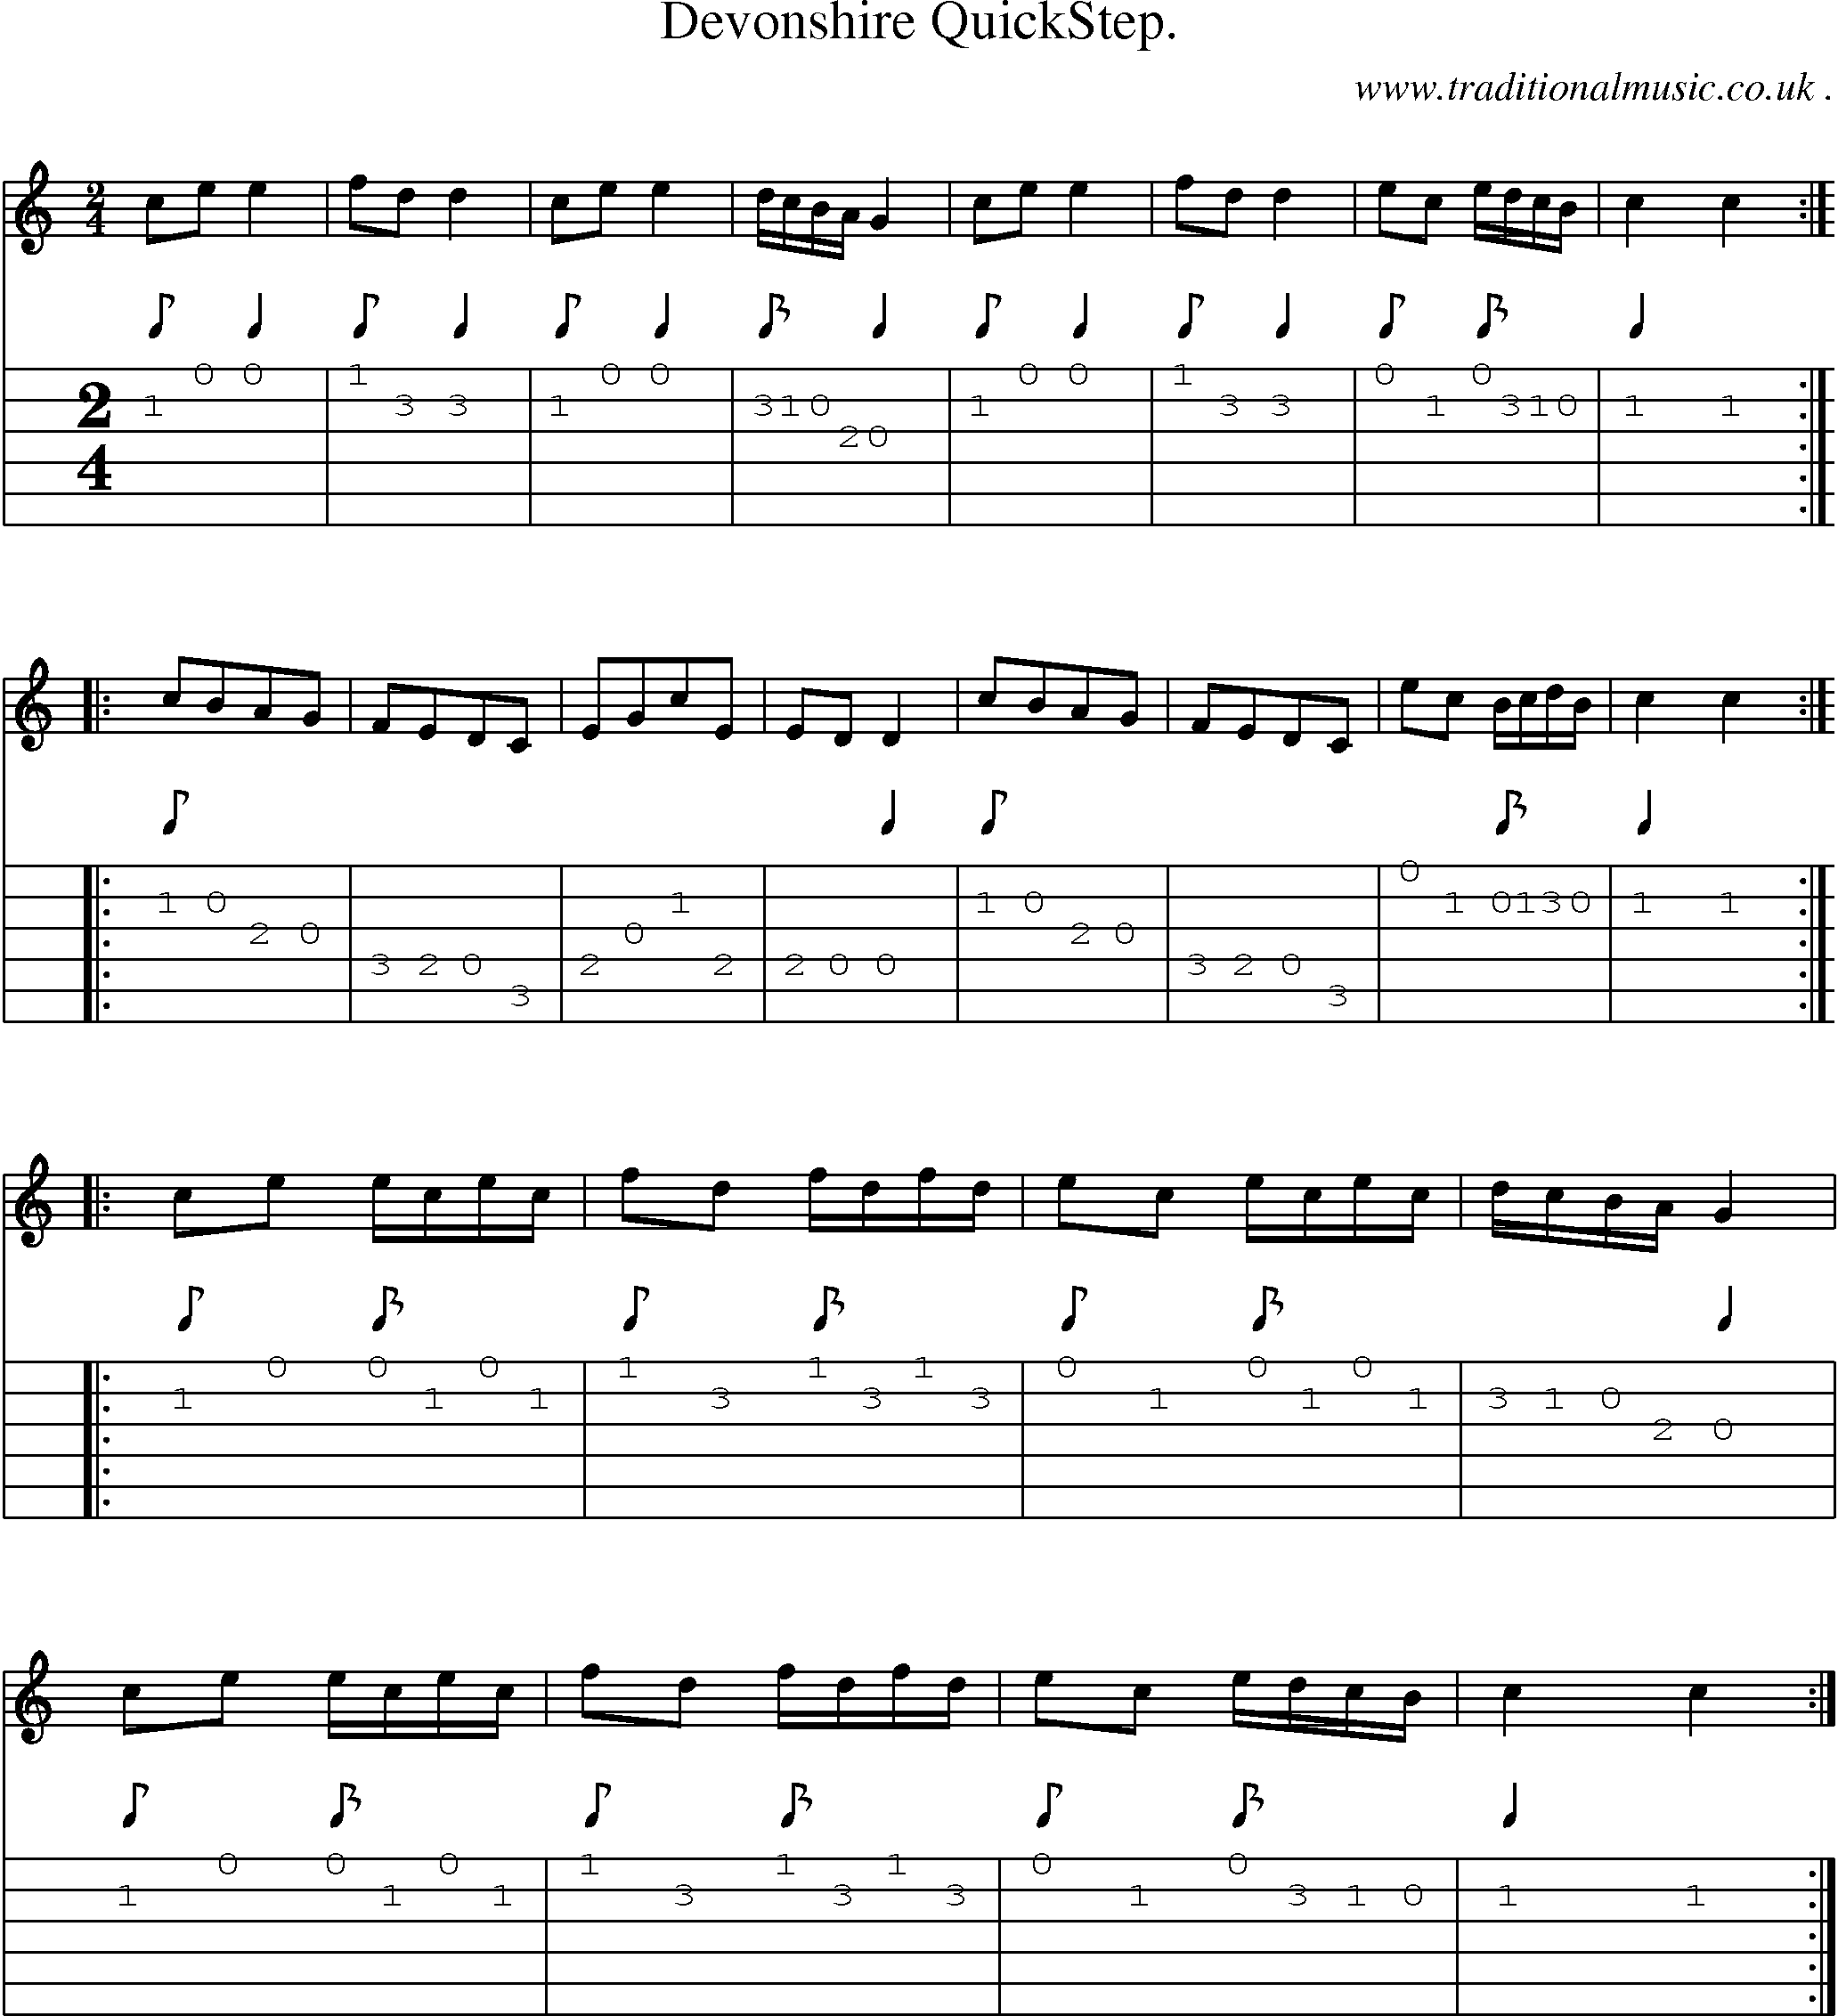 Sheet-Music and Guitar Tabs for Devonshire Quickstep